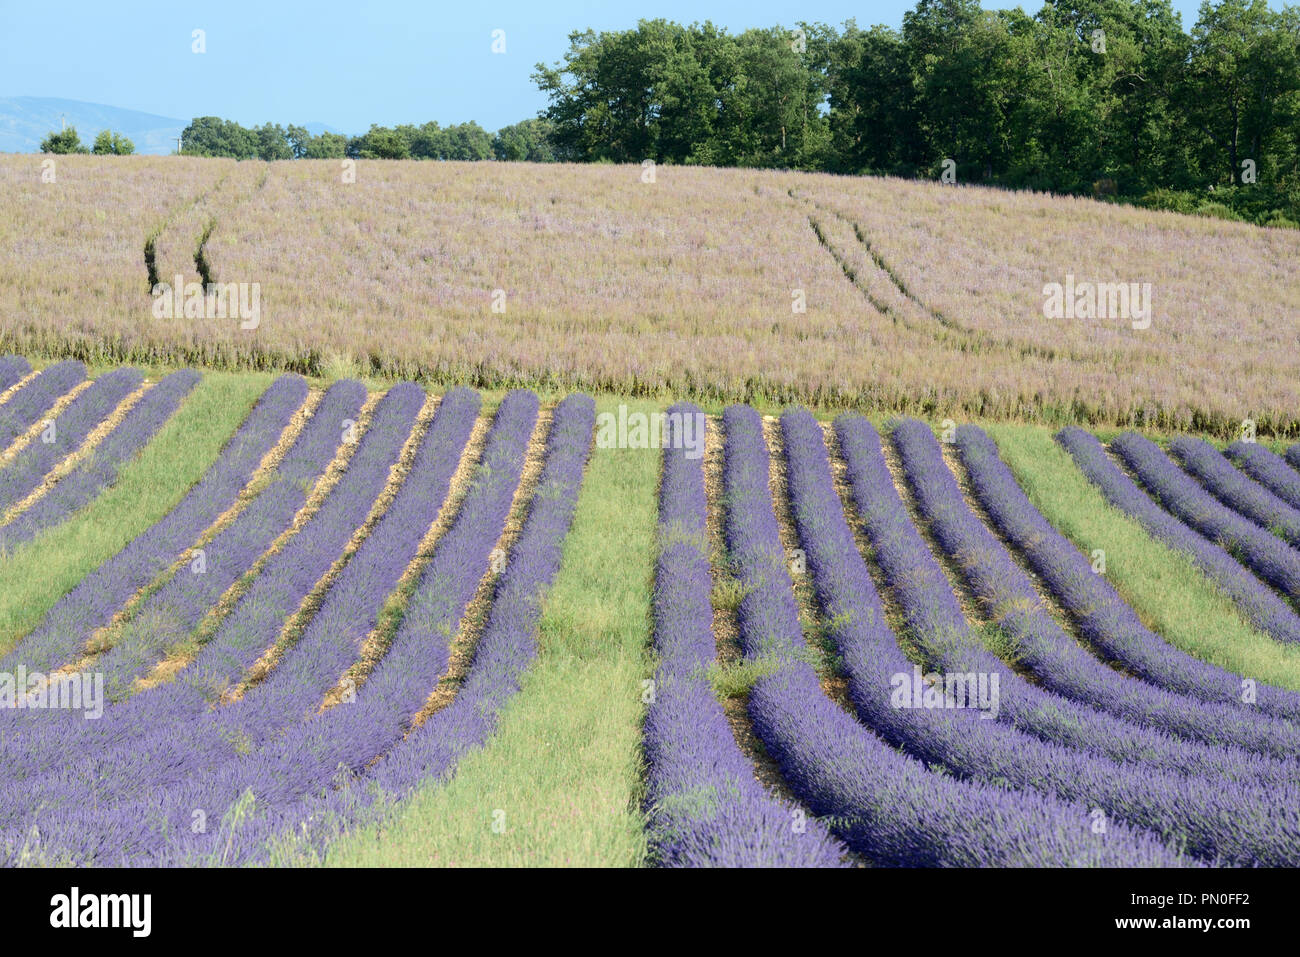 Rows of Lavender Plants & Field of Clary or Clary Sage, Salvia sclarea, on the Valensole Plateau Provence France Stock Photo